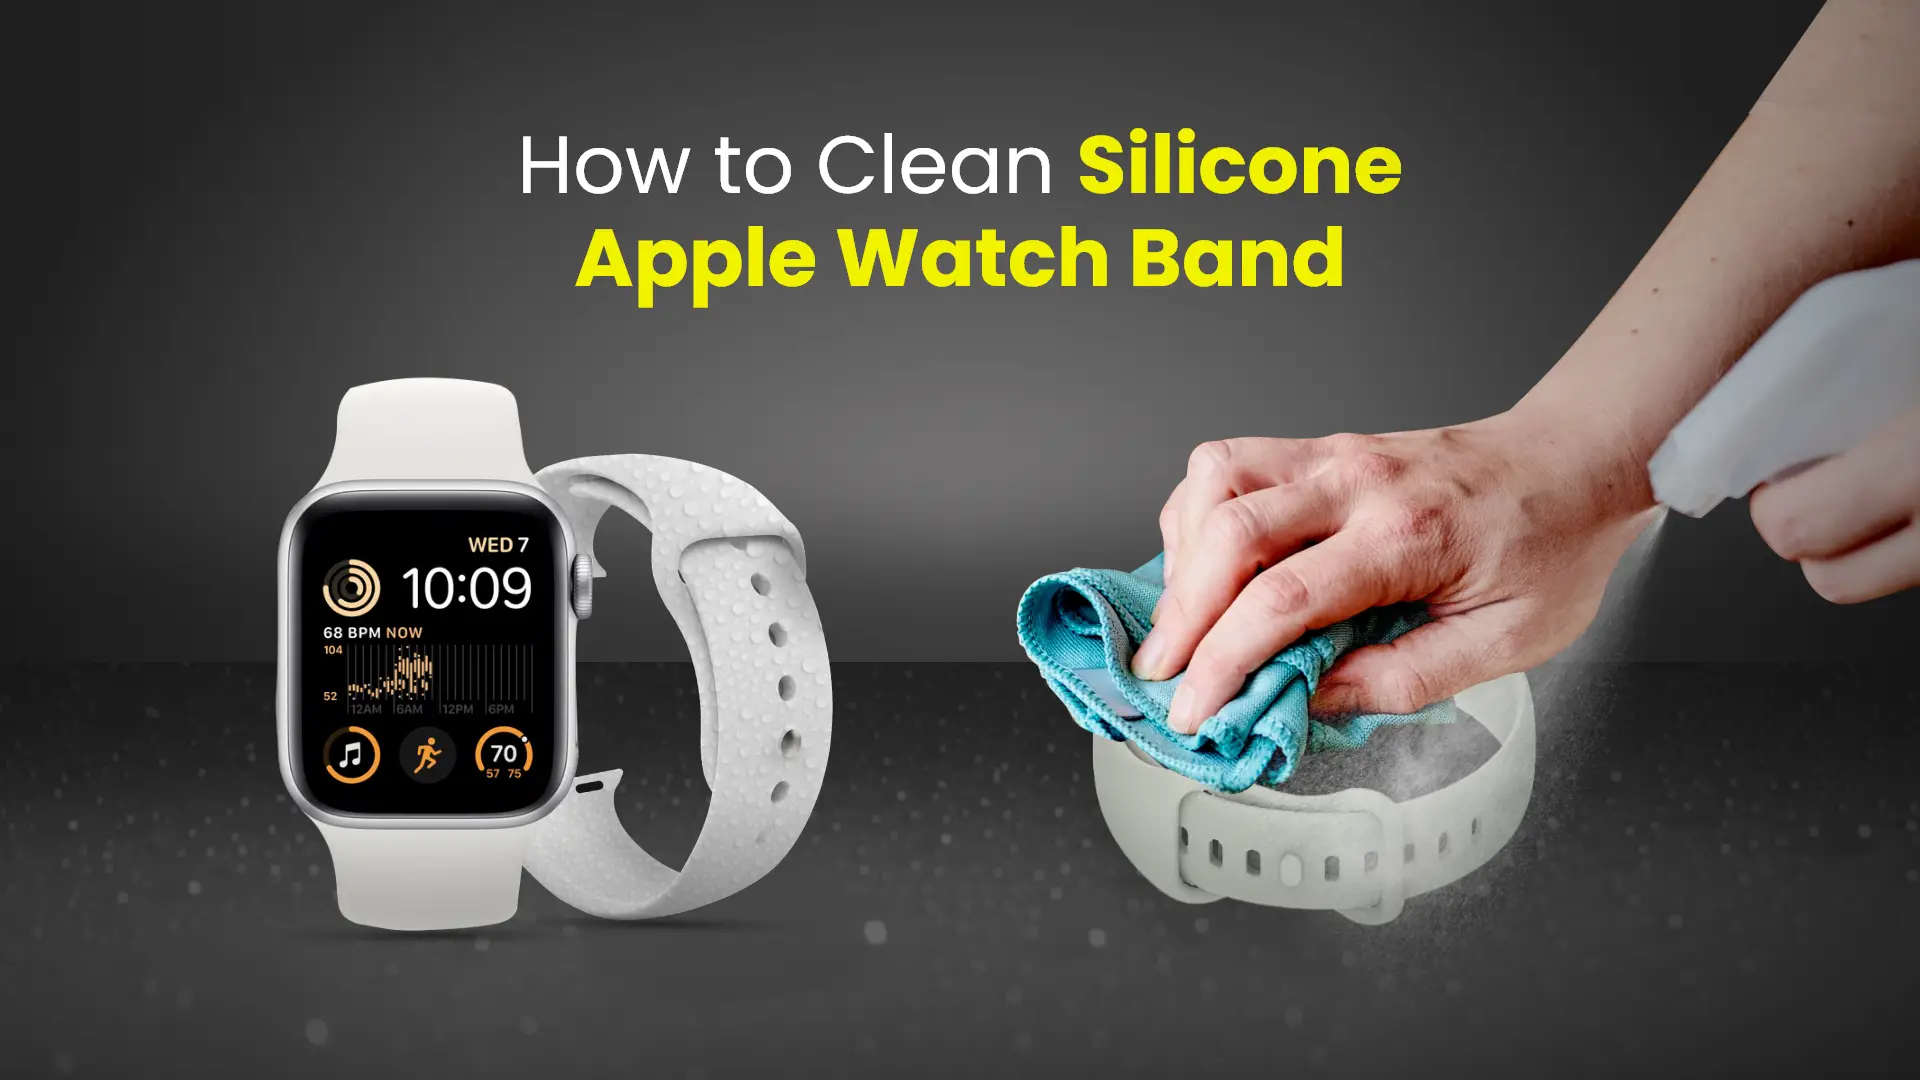 How to clean silicone Apple Watch band